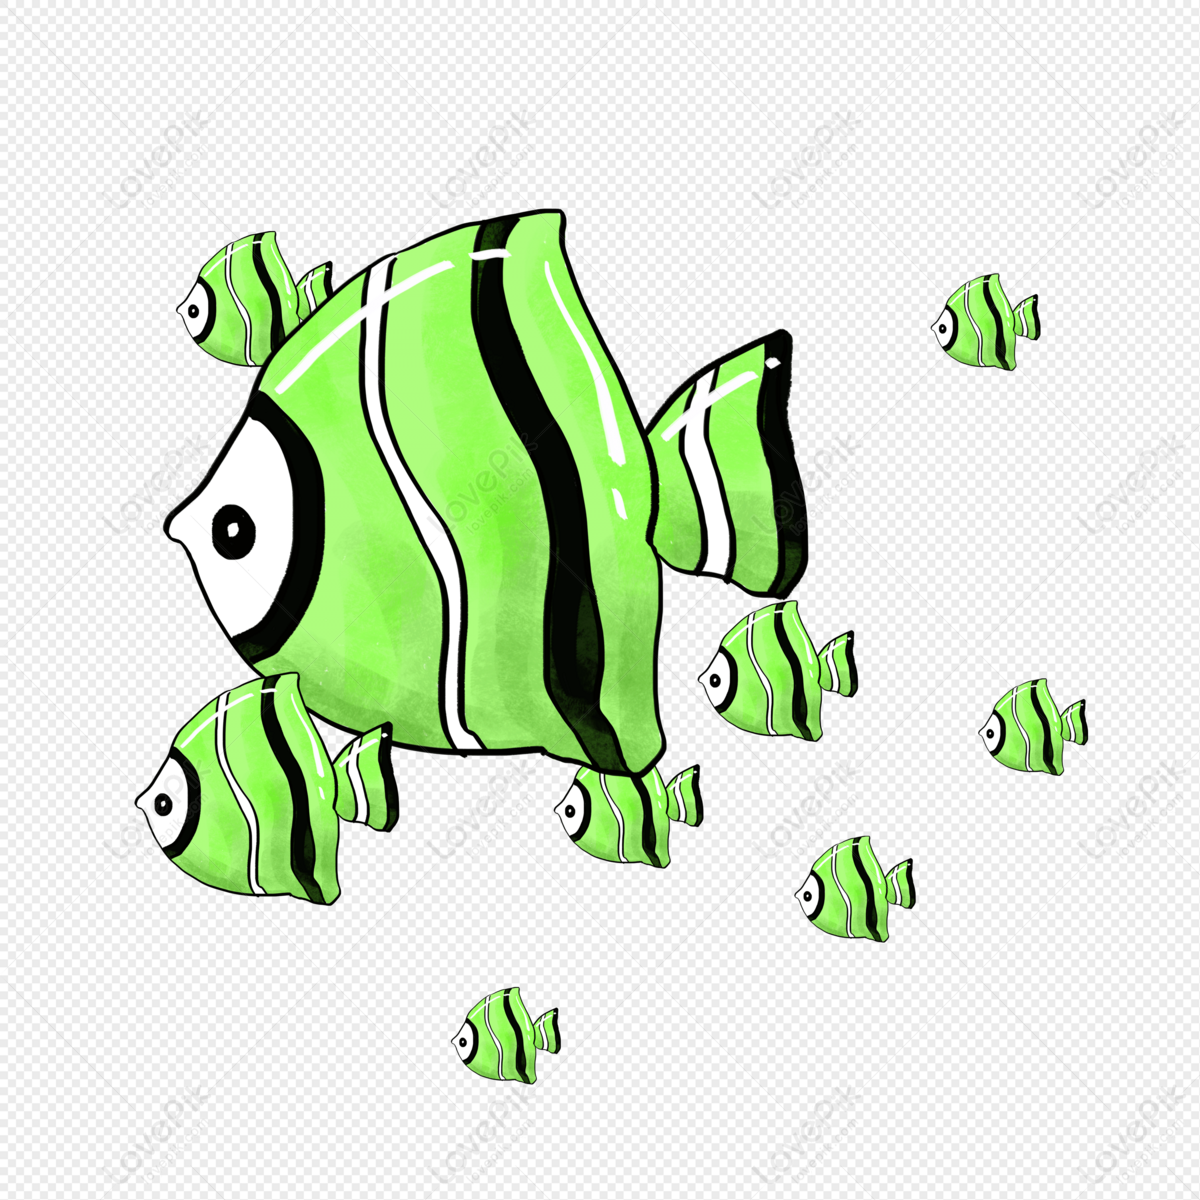 Cute Fish Images, HD Pictures For Free Vectors Download 